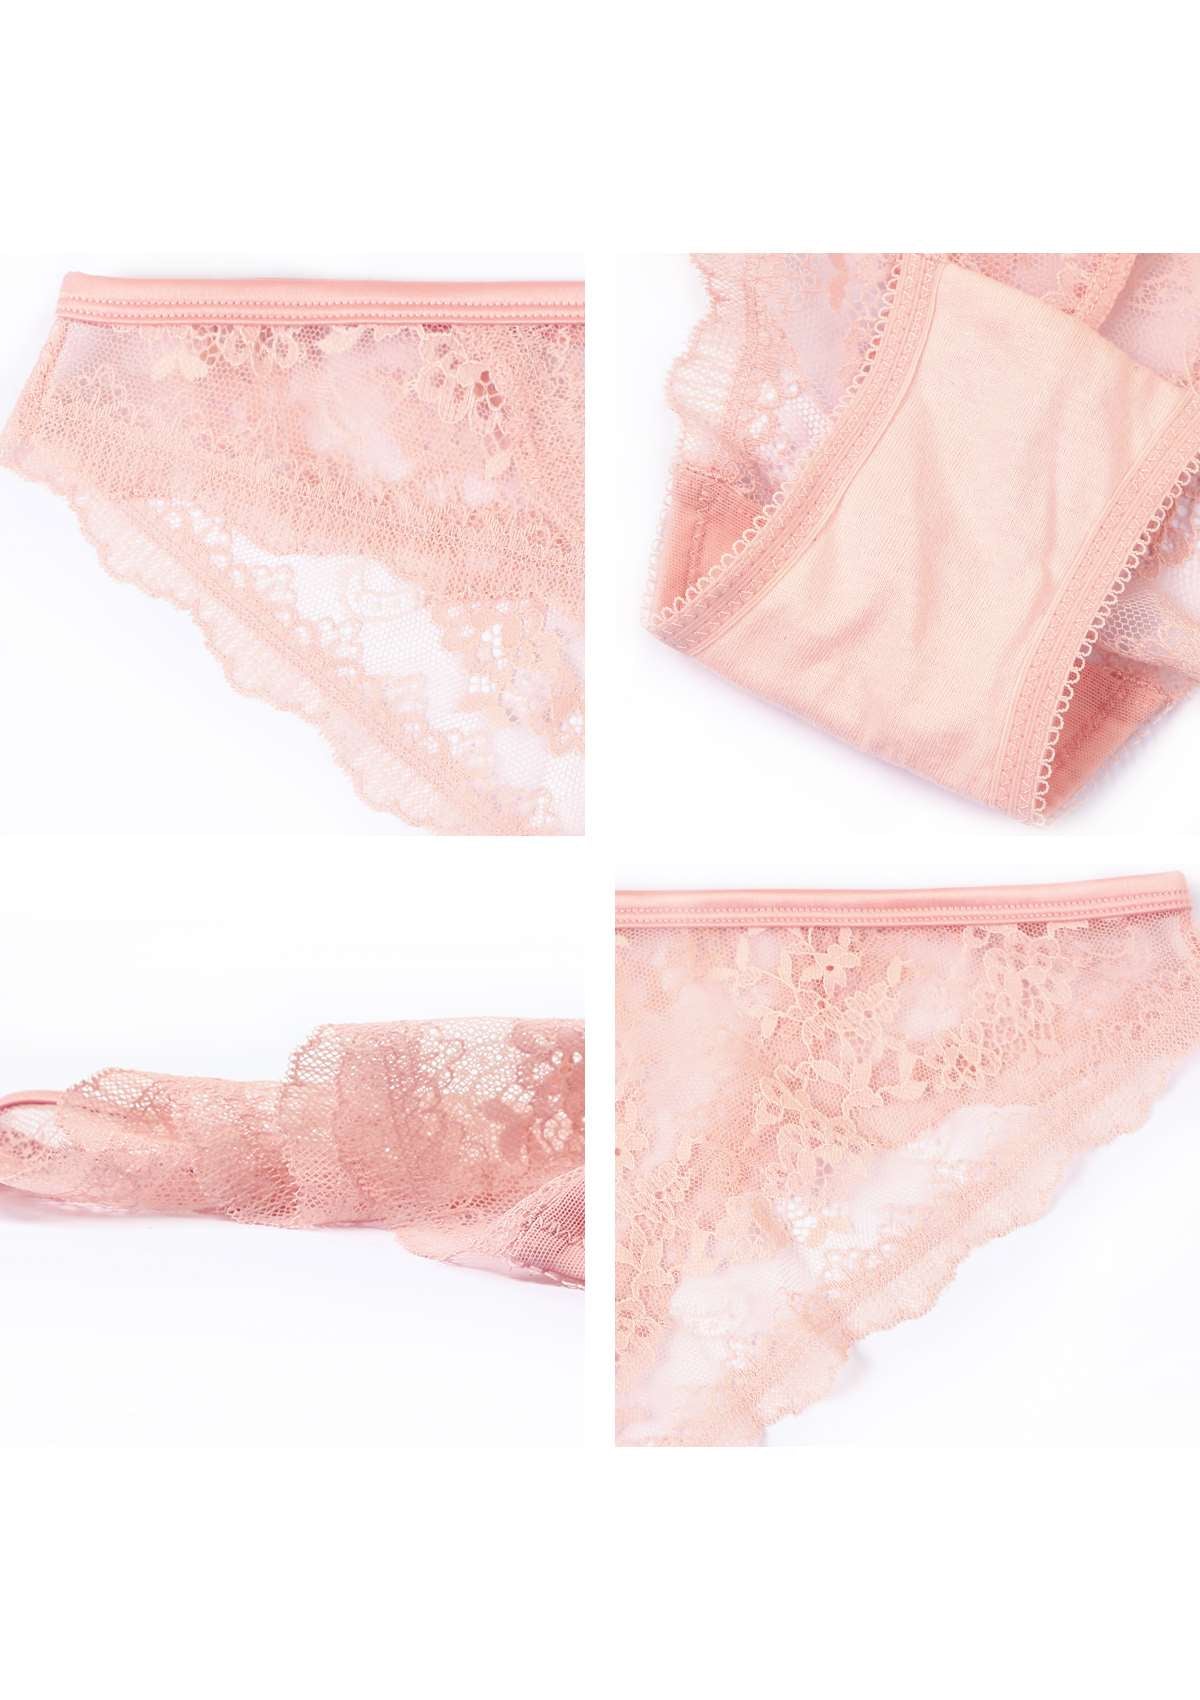 HSIA Floral Bridal Lace Back Cheeky Delicate Underwear  - Pink / XL